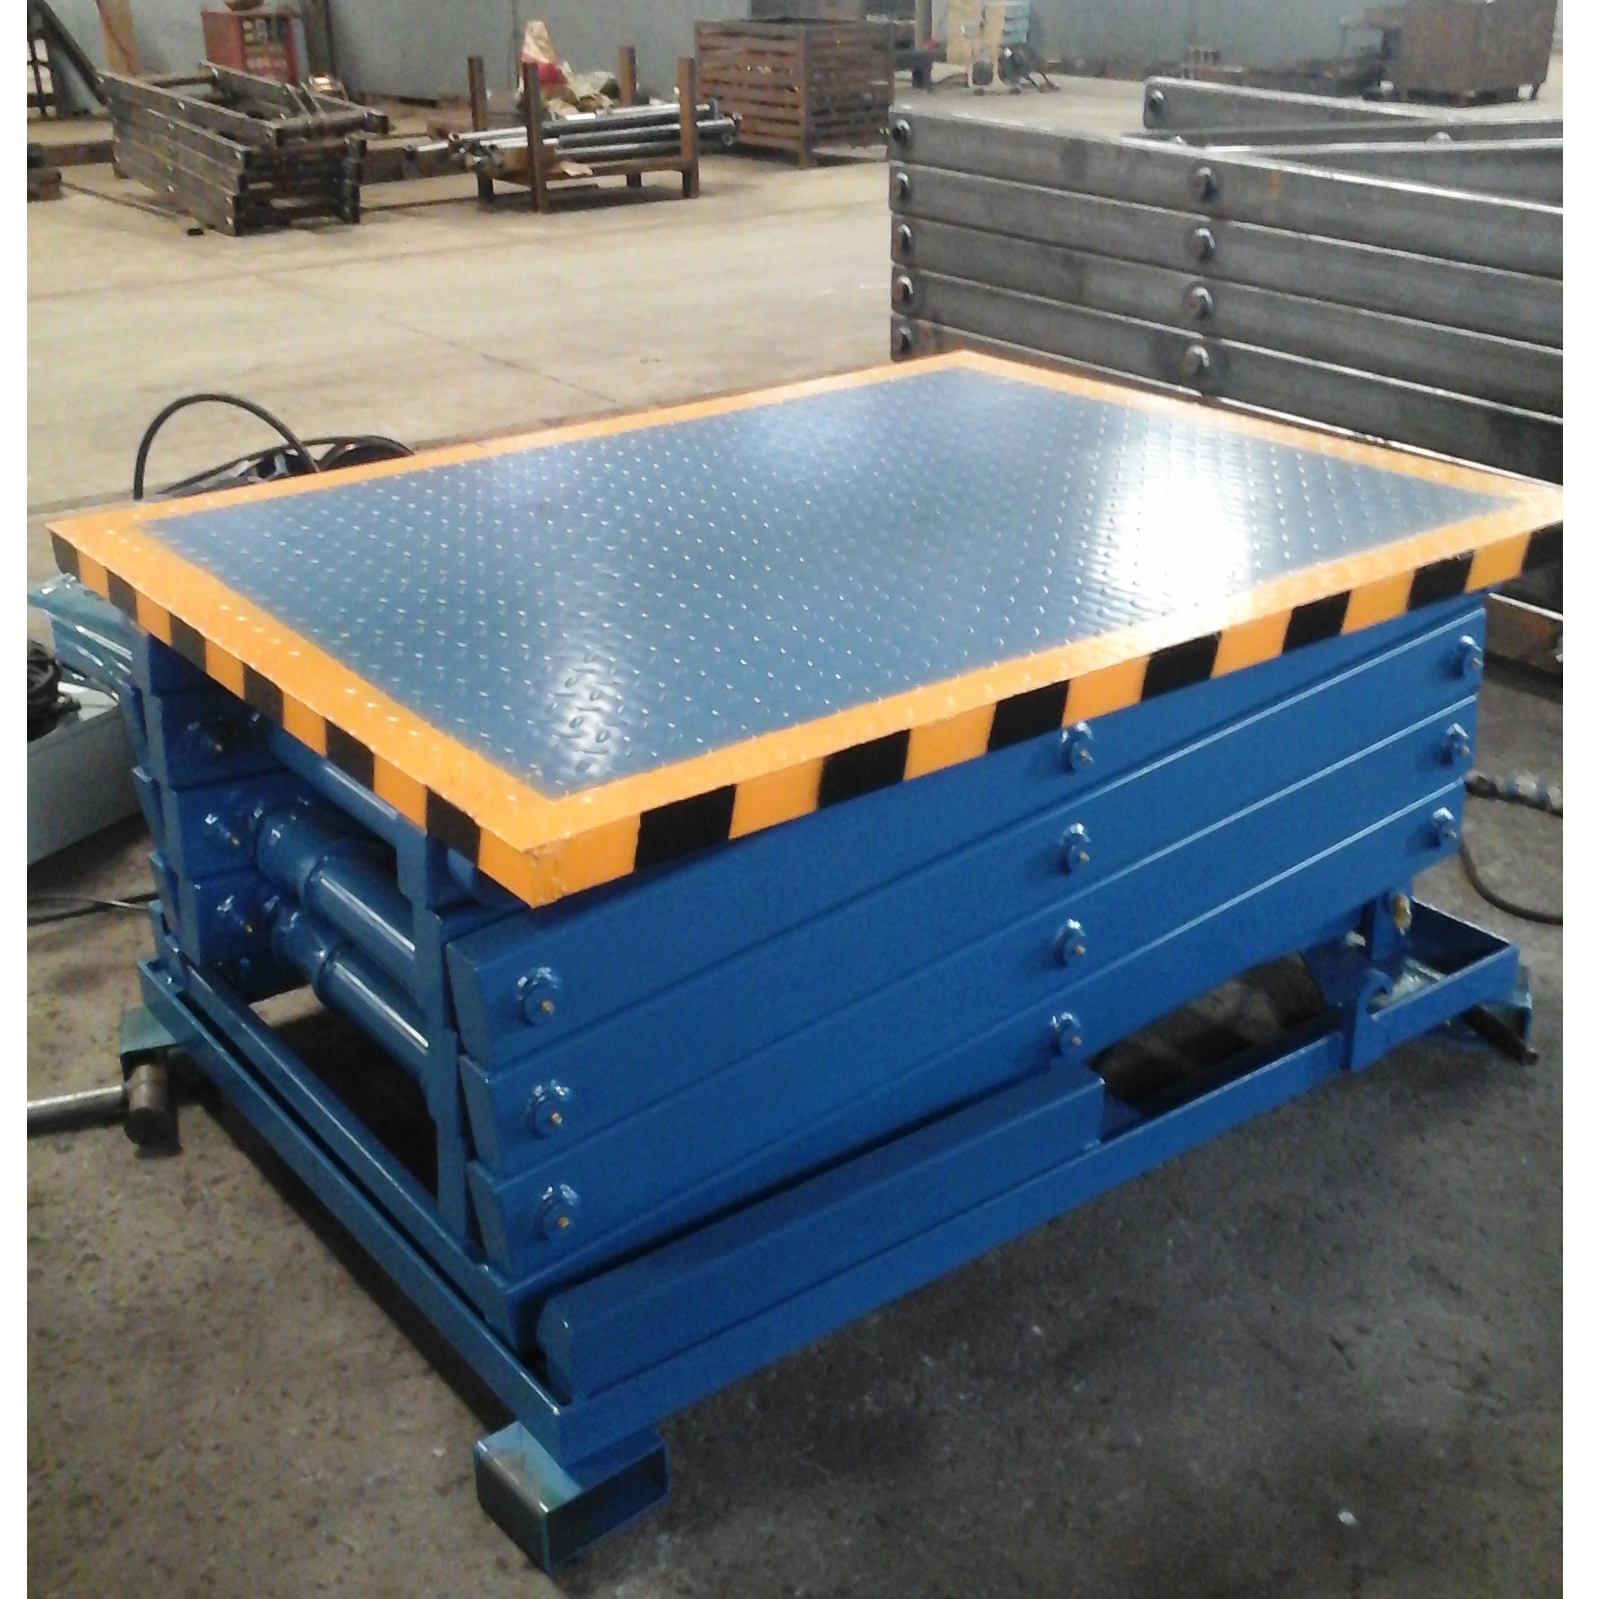 Stationay Hydraulic Lift Table